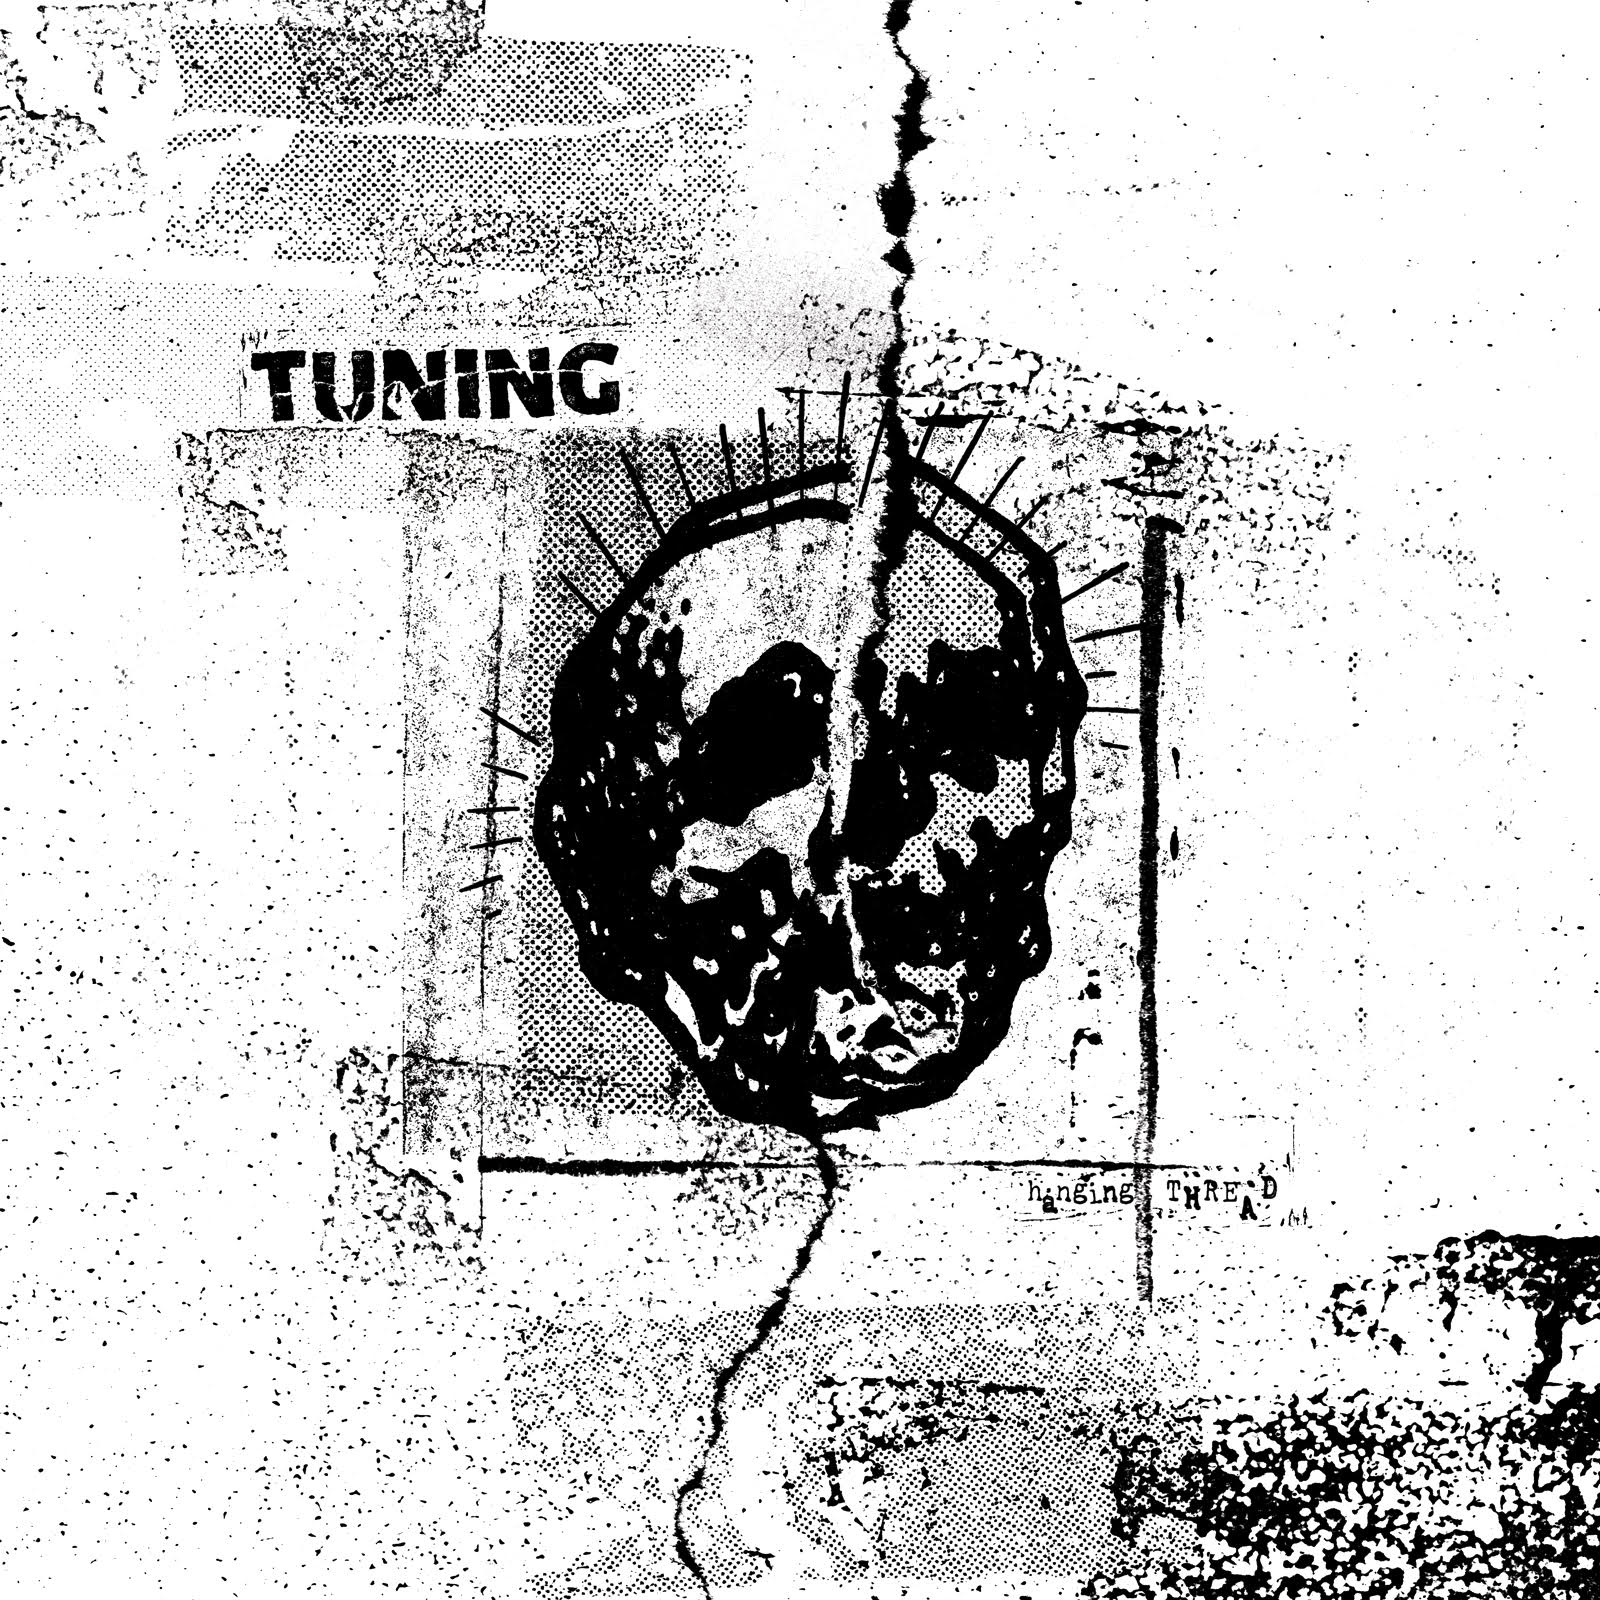 TUNING 'Hanging Thread' LP / COLORED EDITION